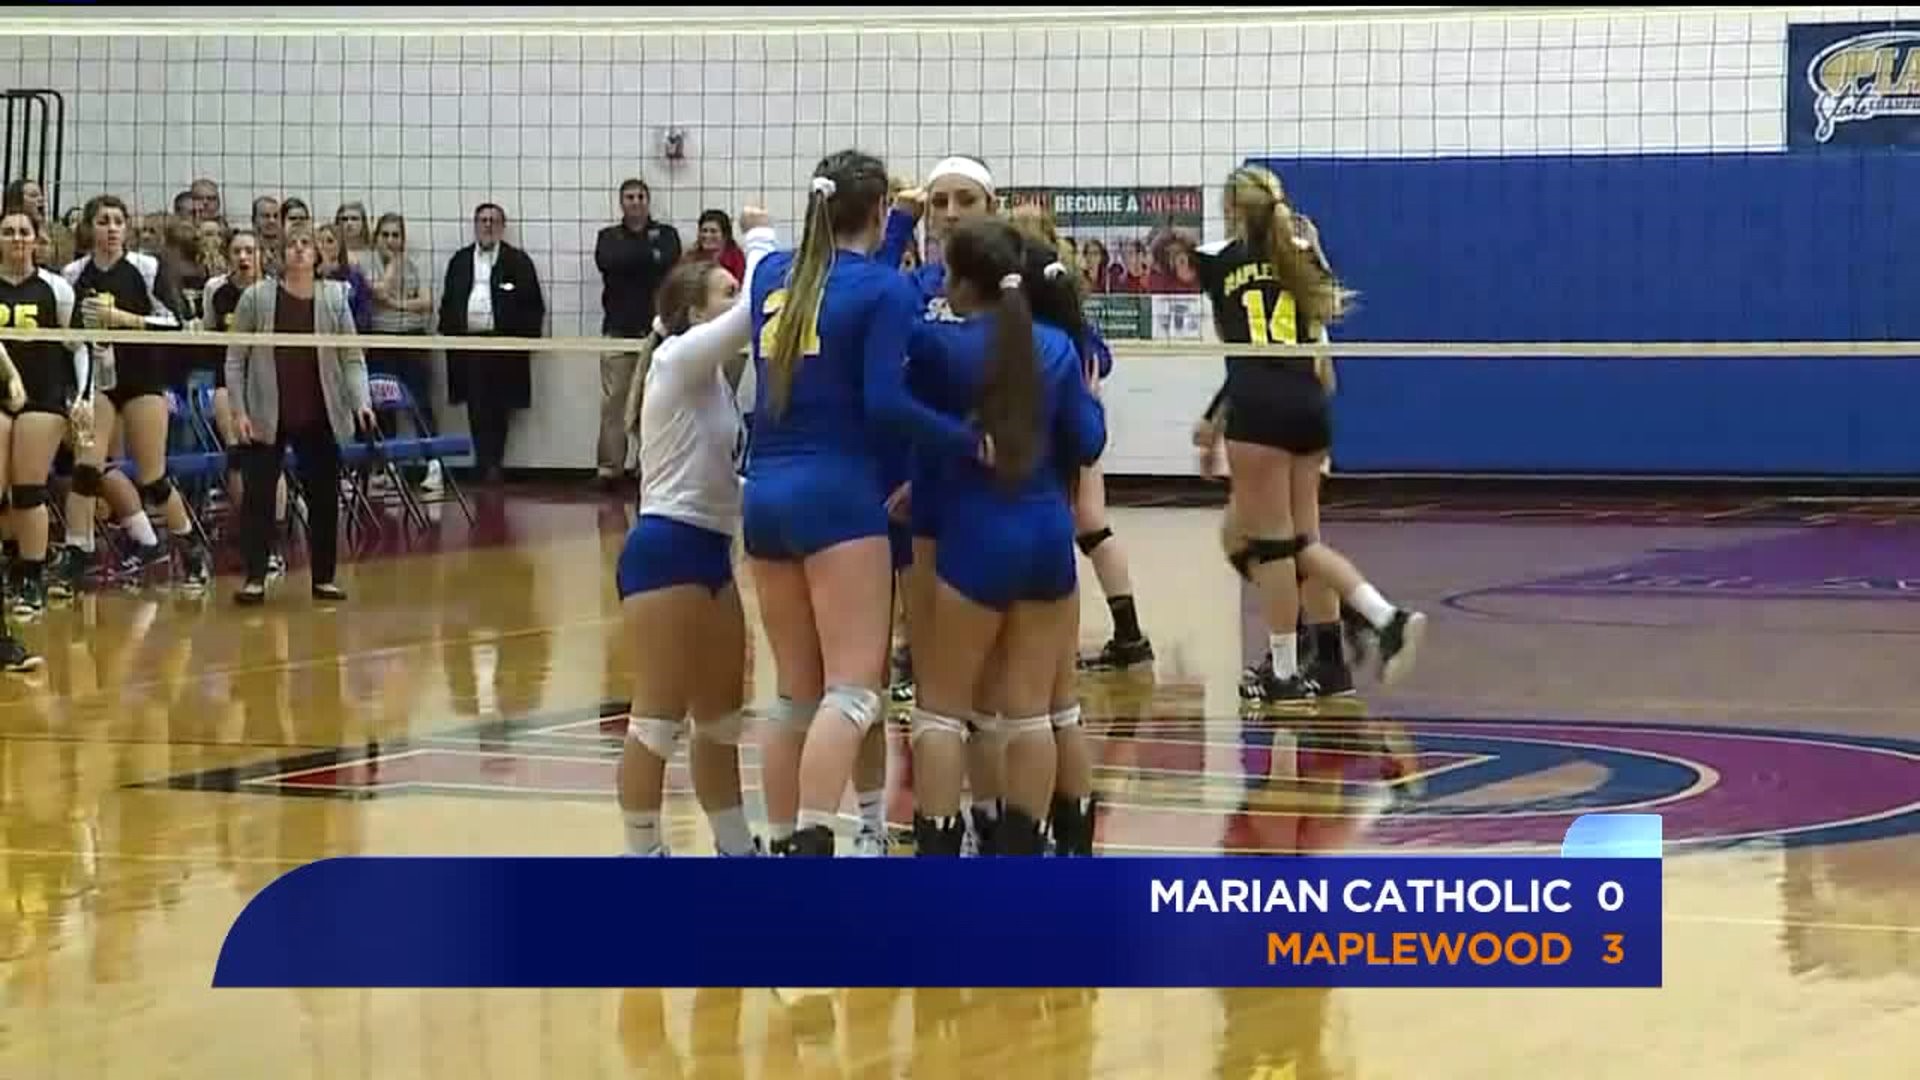 Marian Catholic Falls in Straight Sets to Maplewood in State Title Match